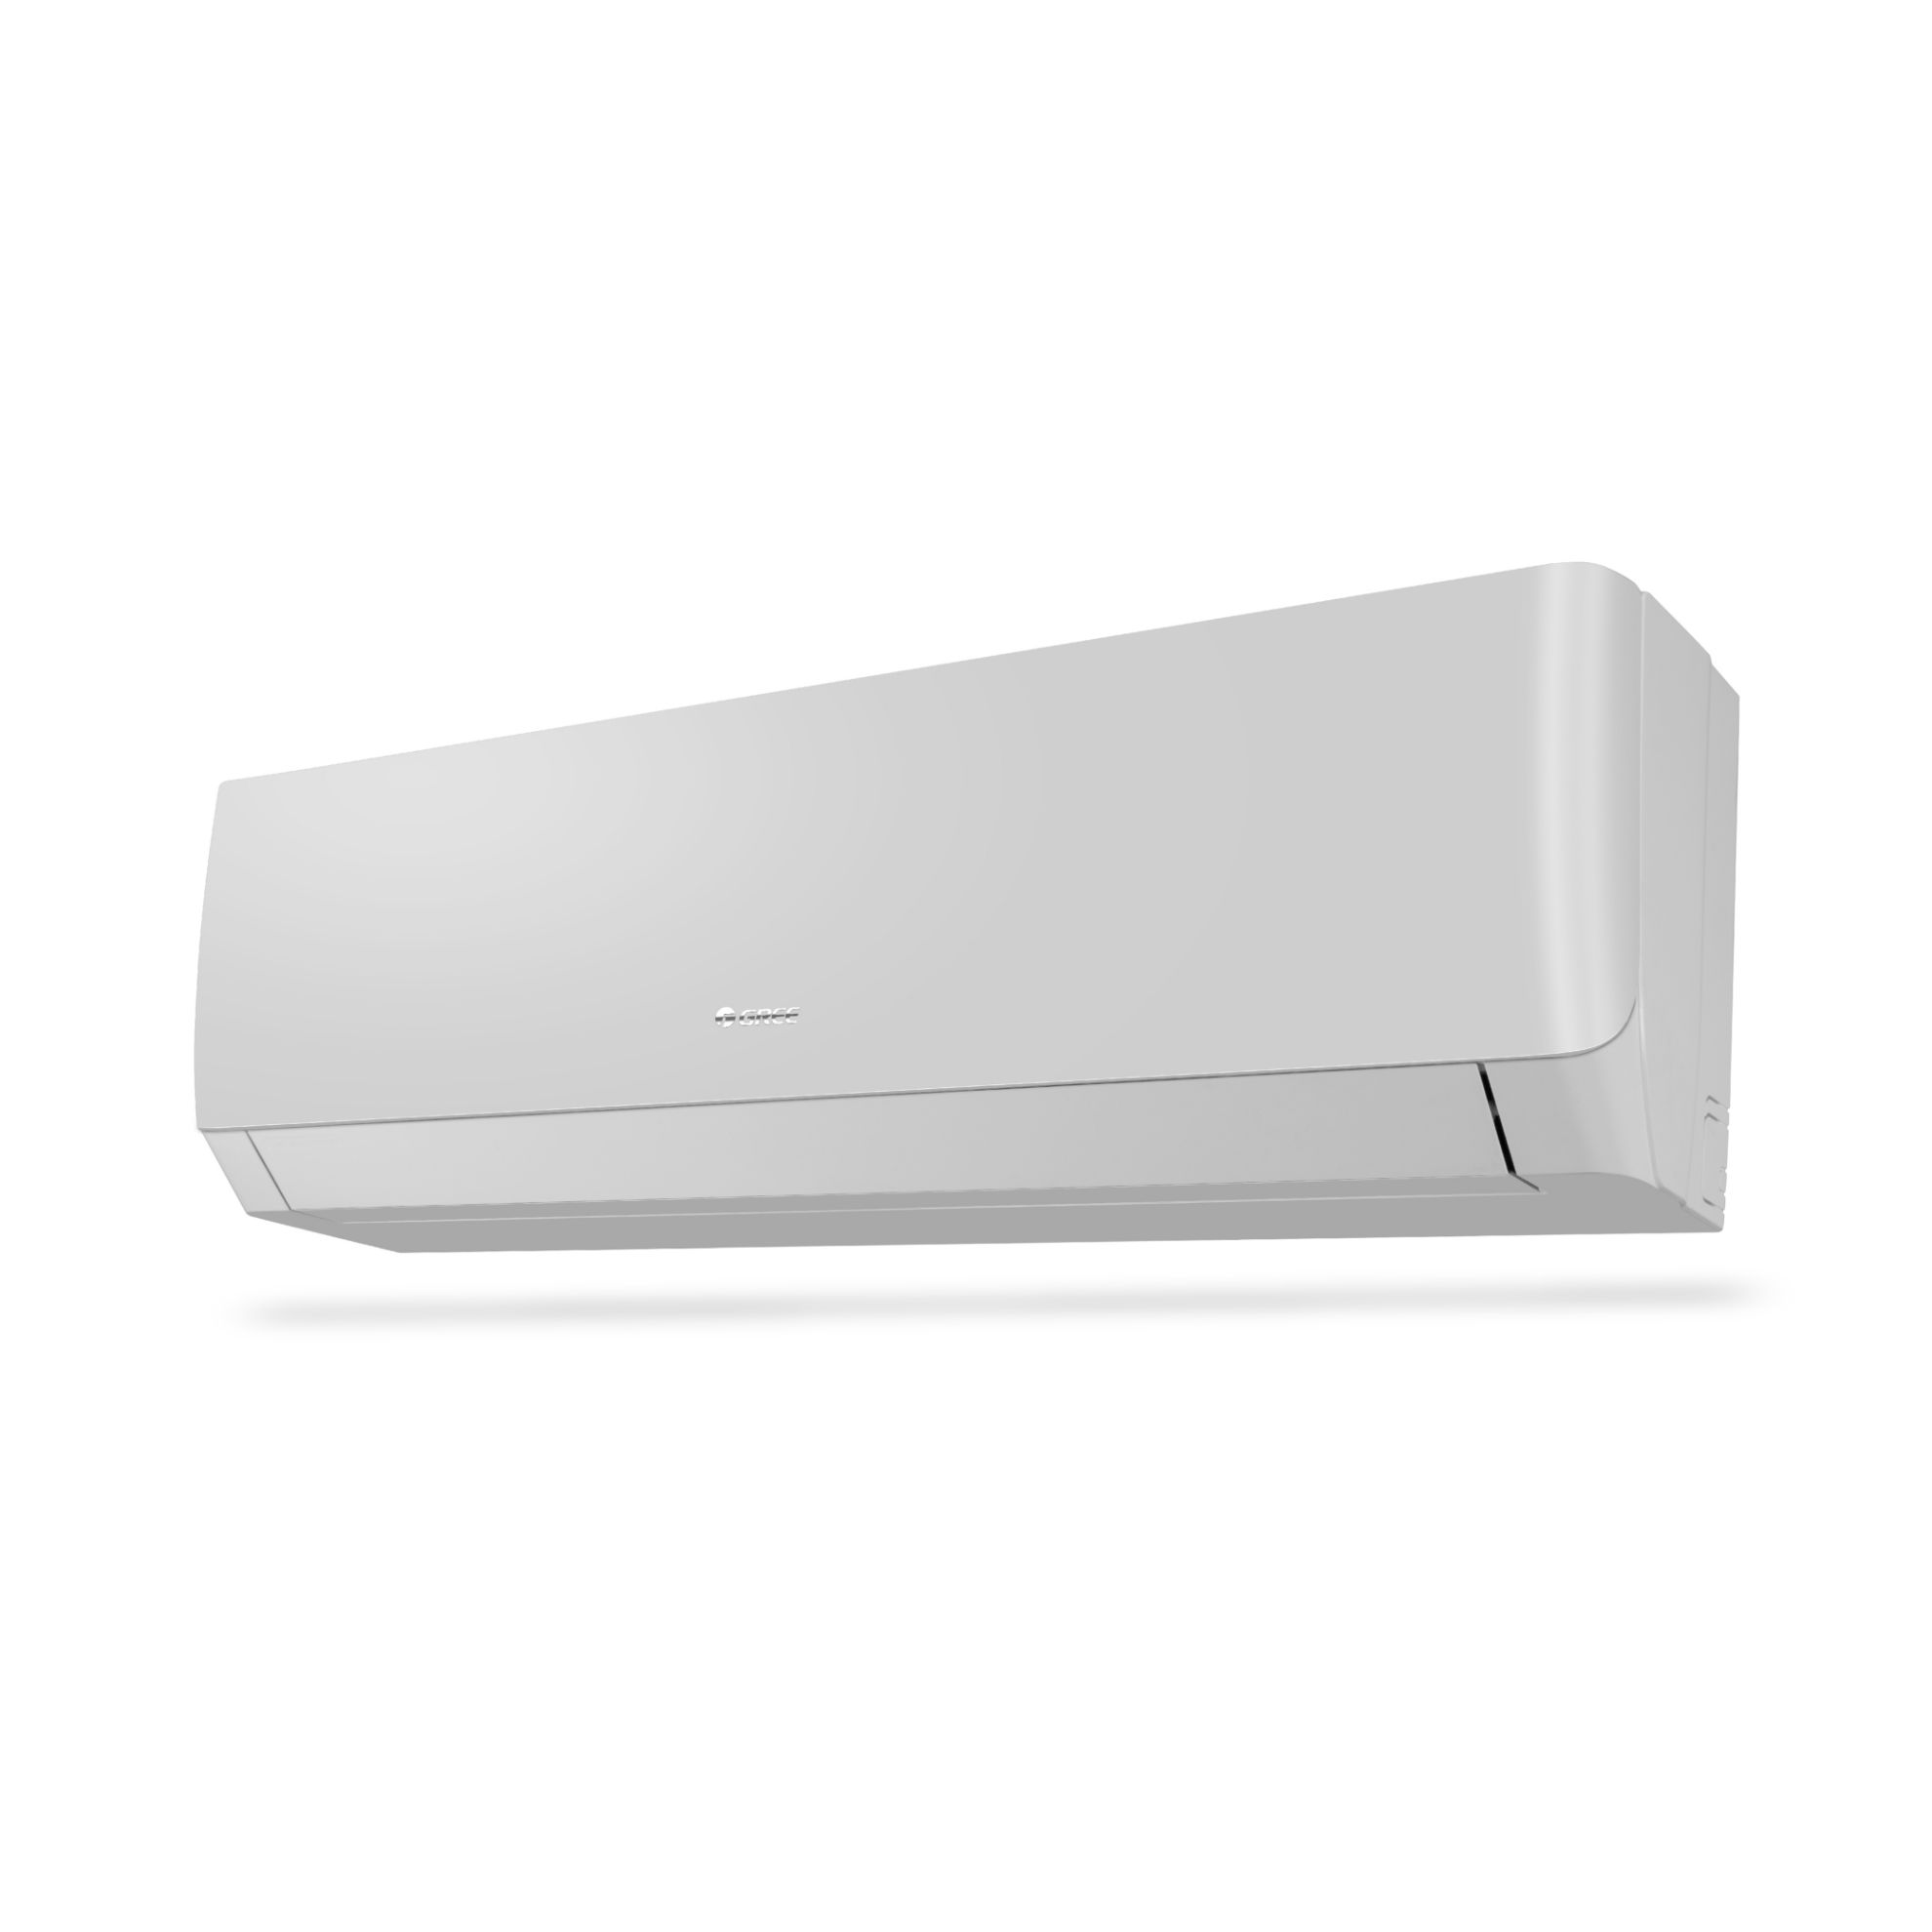 Picture of Gree - iSAVE PLUS-12C3 - 1 Ton|Inverter|Wall Split AC